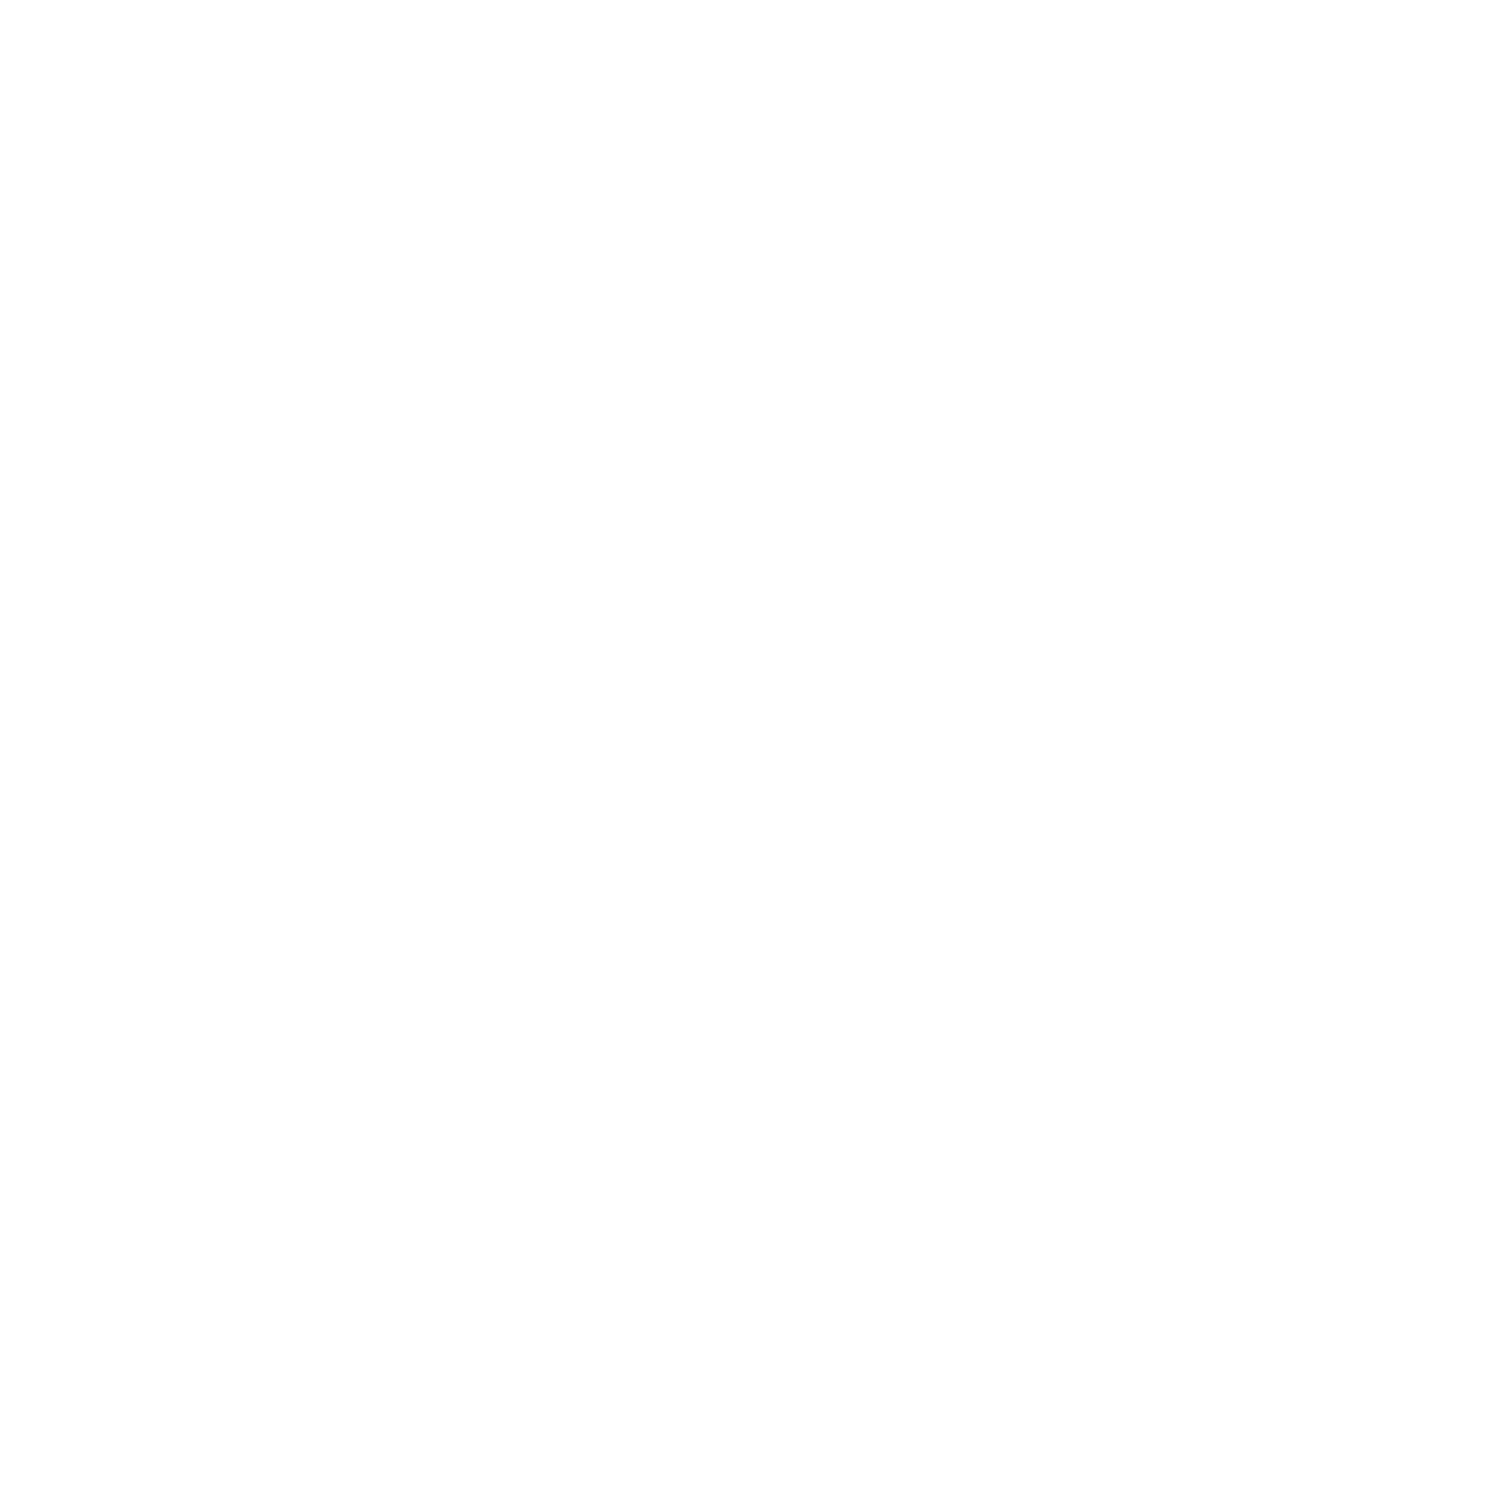 Wed by Rose